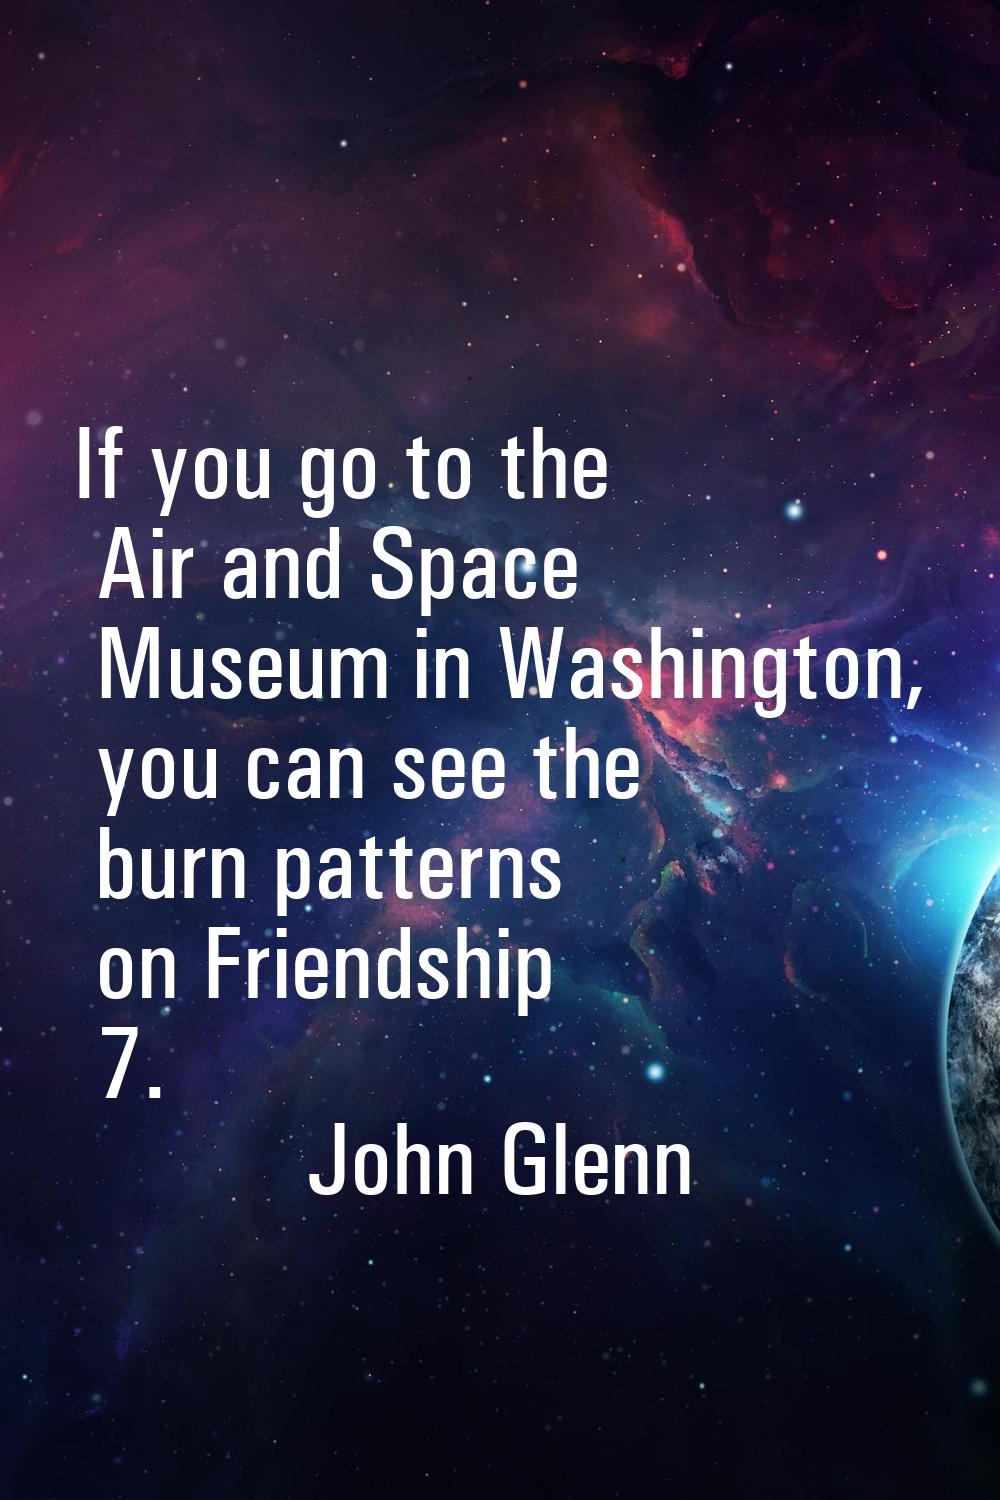 If you go to the Air and Space Museum in Washington, you can see the burn patterns on Friendship 7.